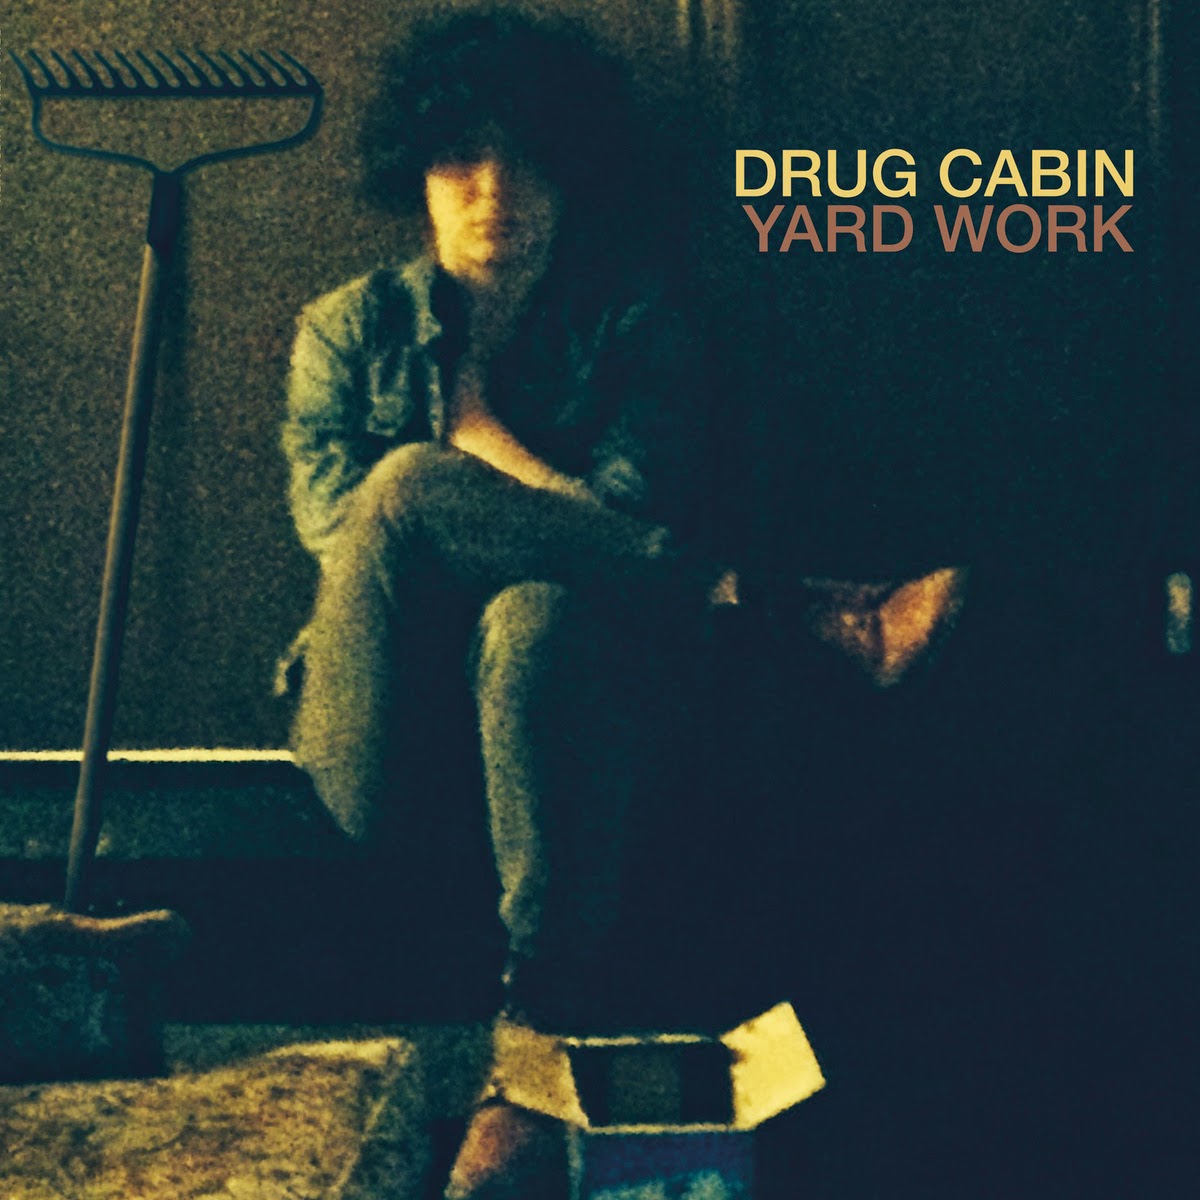 Drug Cabin's "Yard Work" - A Blissfully Deep Mix of Jesus, Marijuana, Lost Dreams and Hollywood